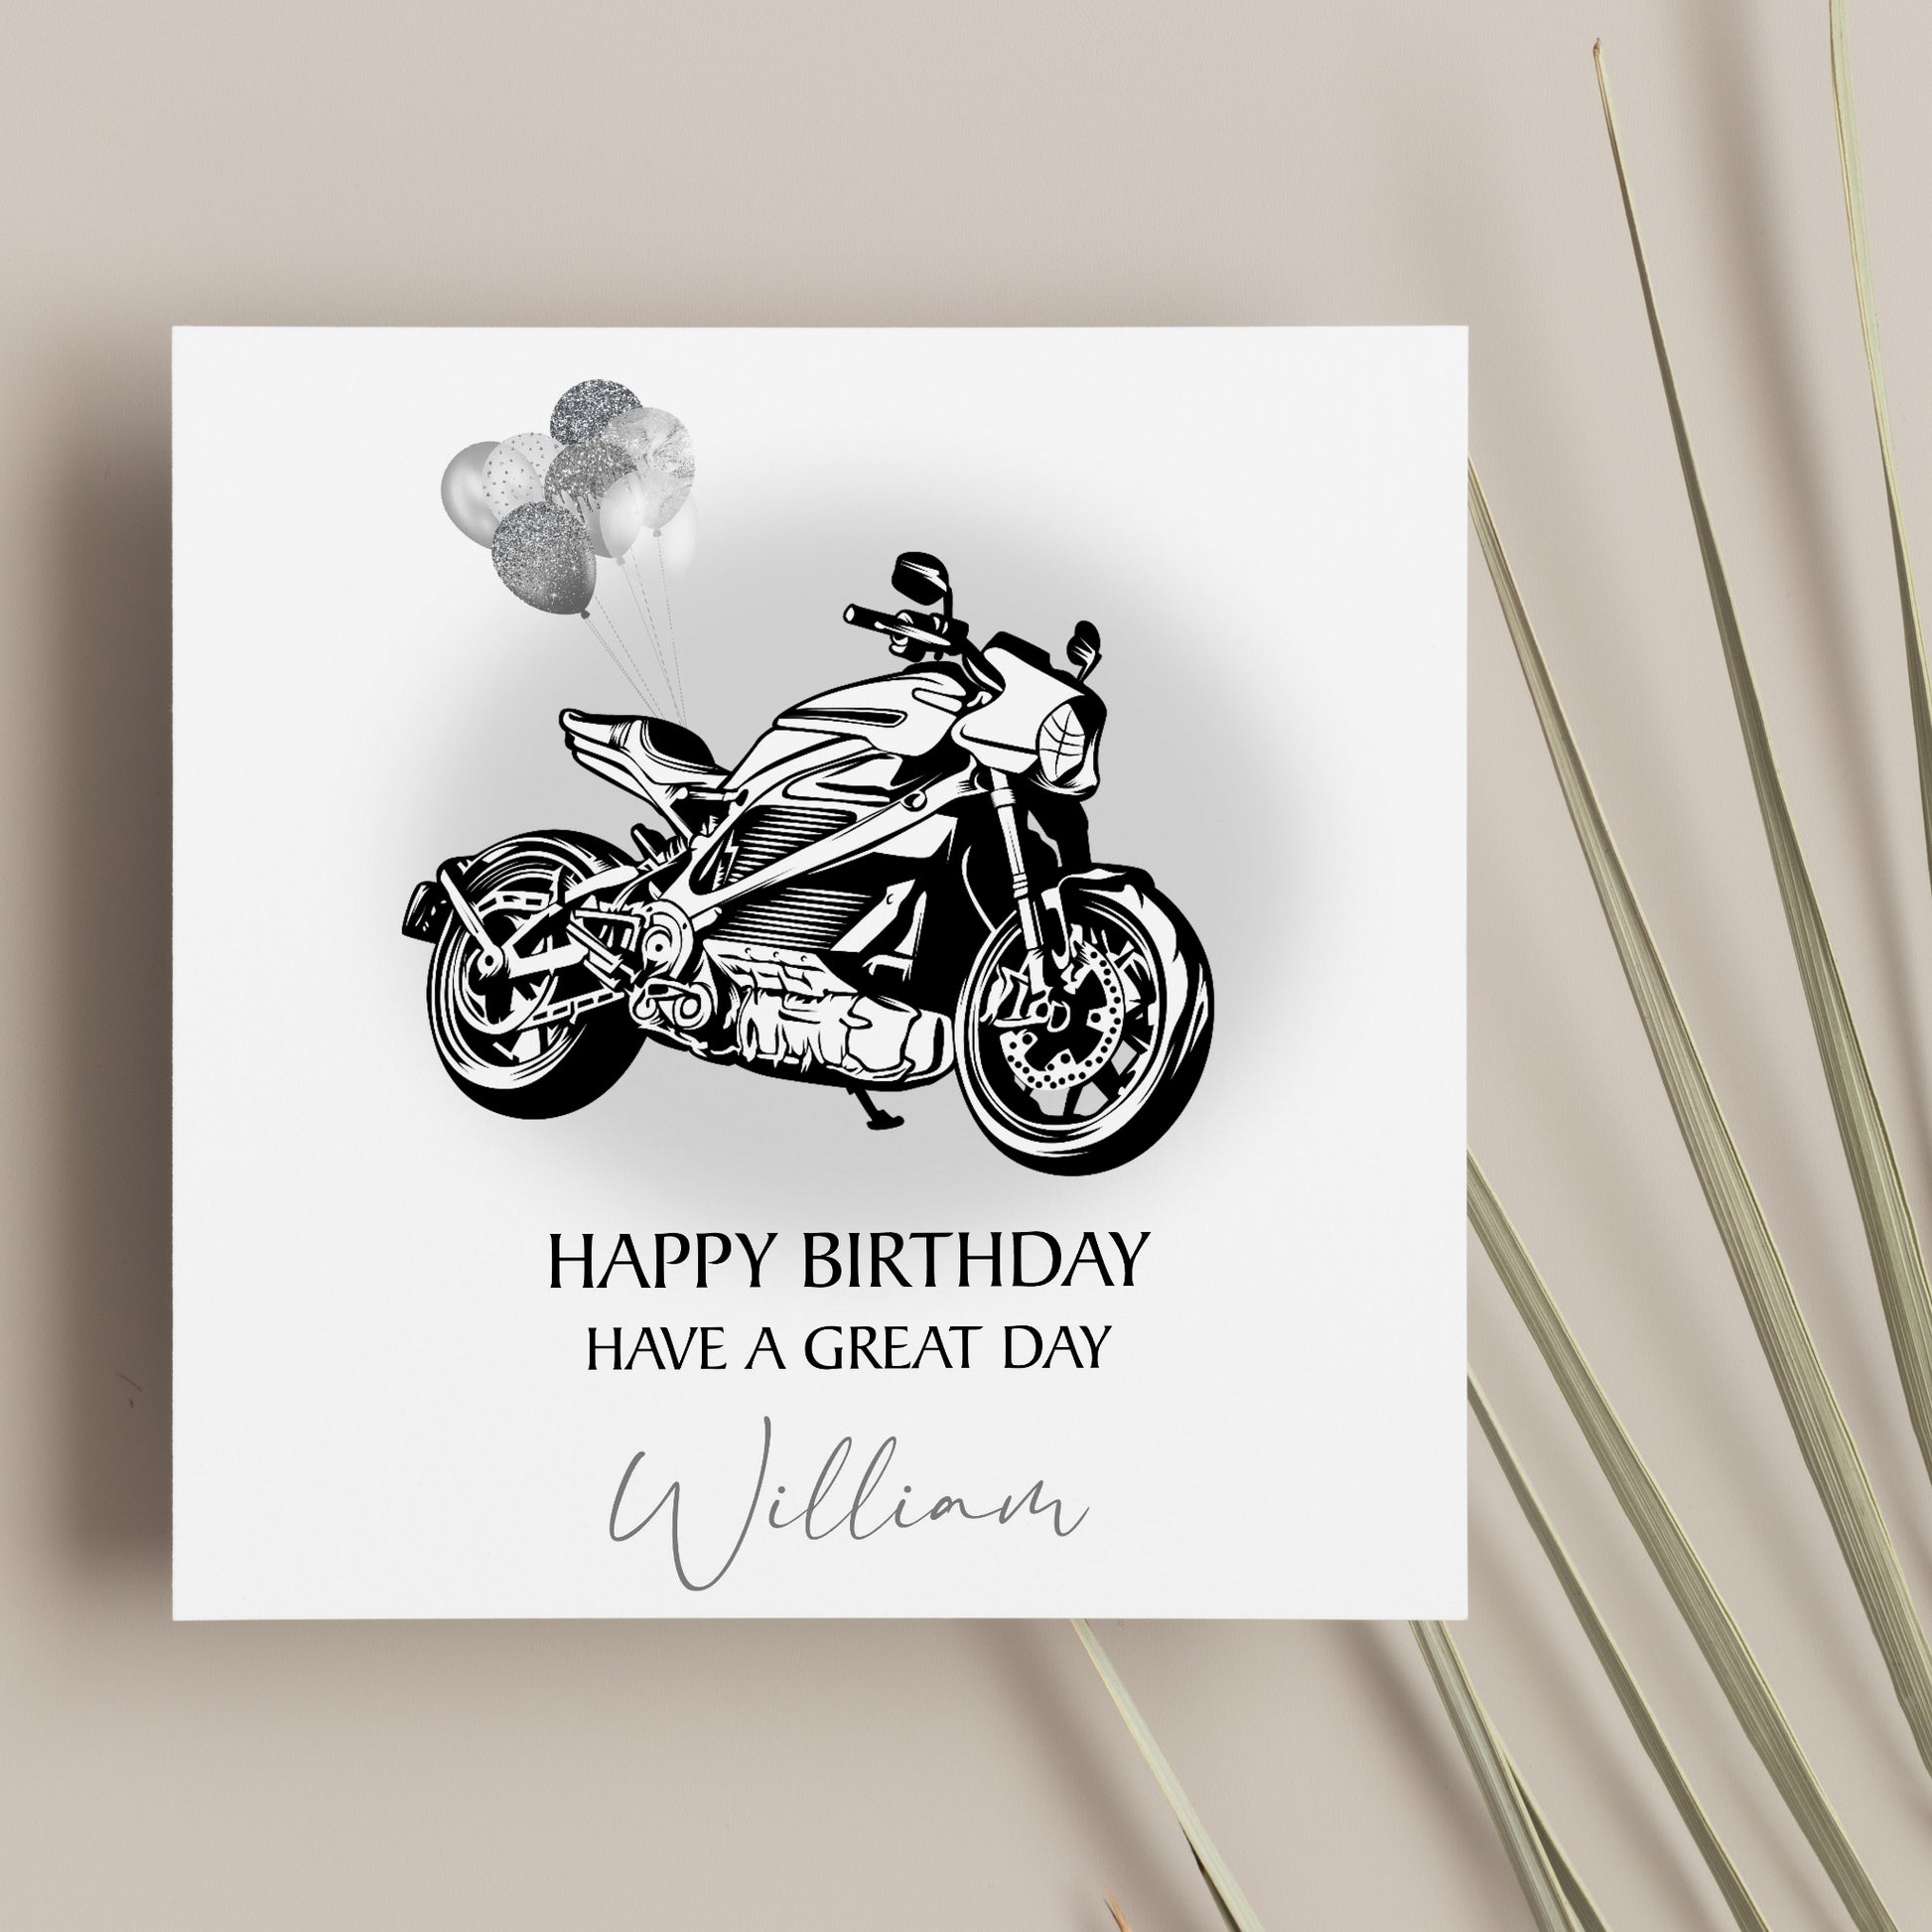 a birthday card with a drawing of a motorcycle